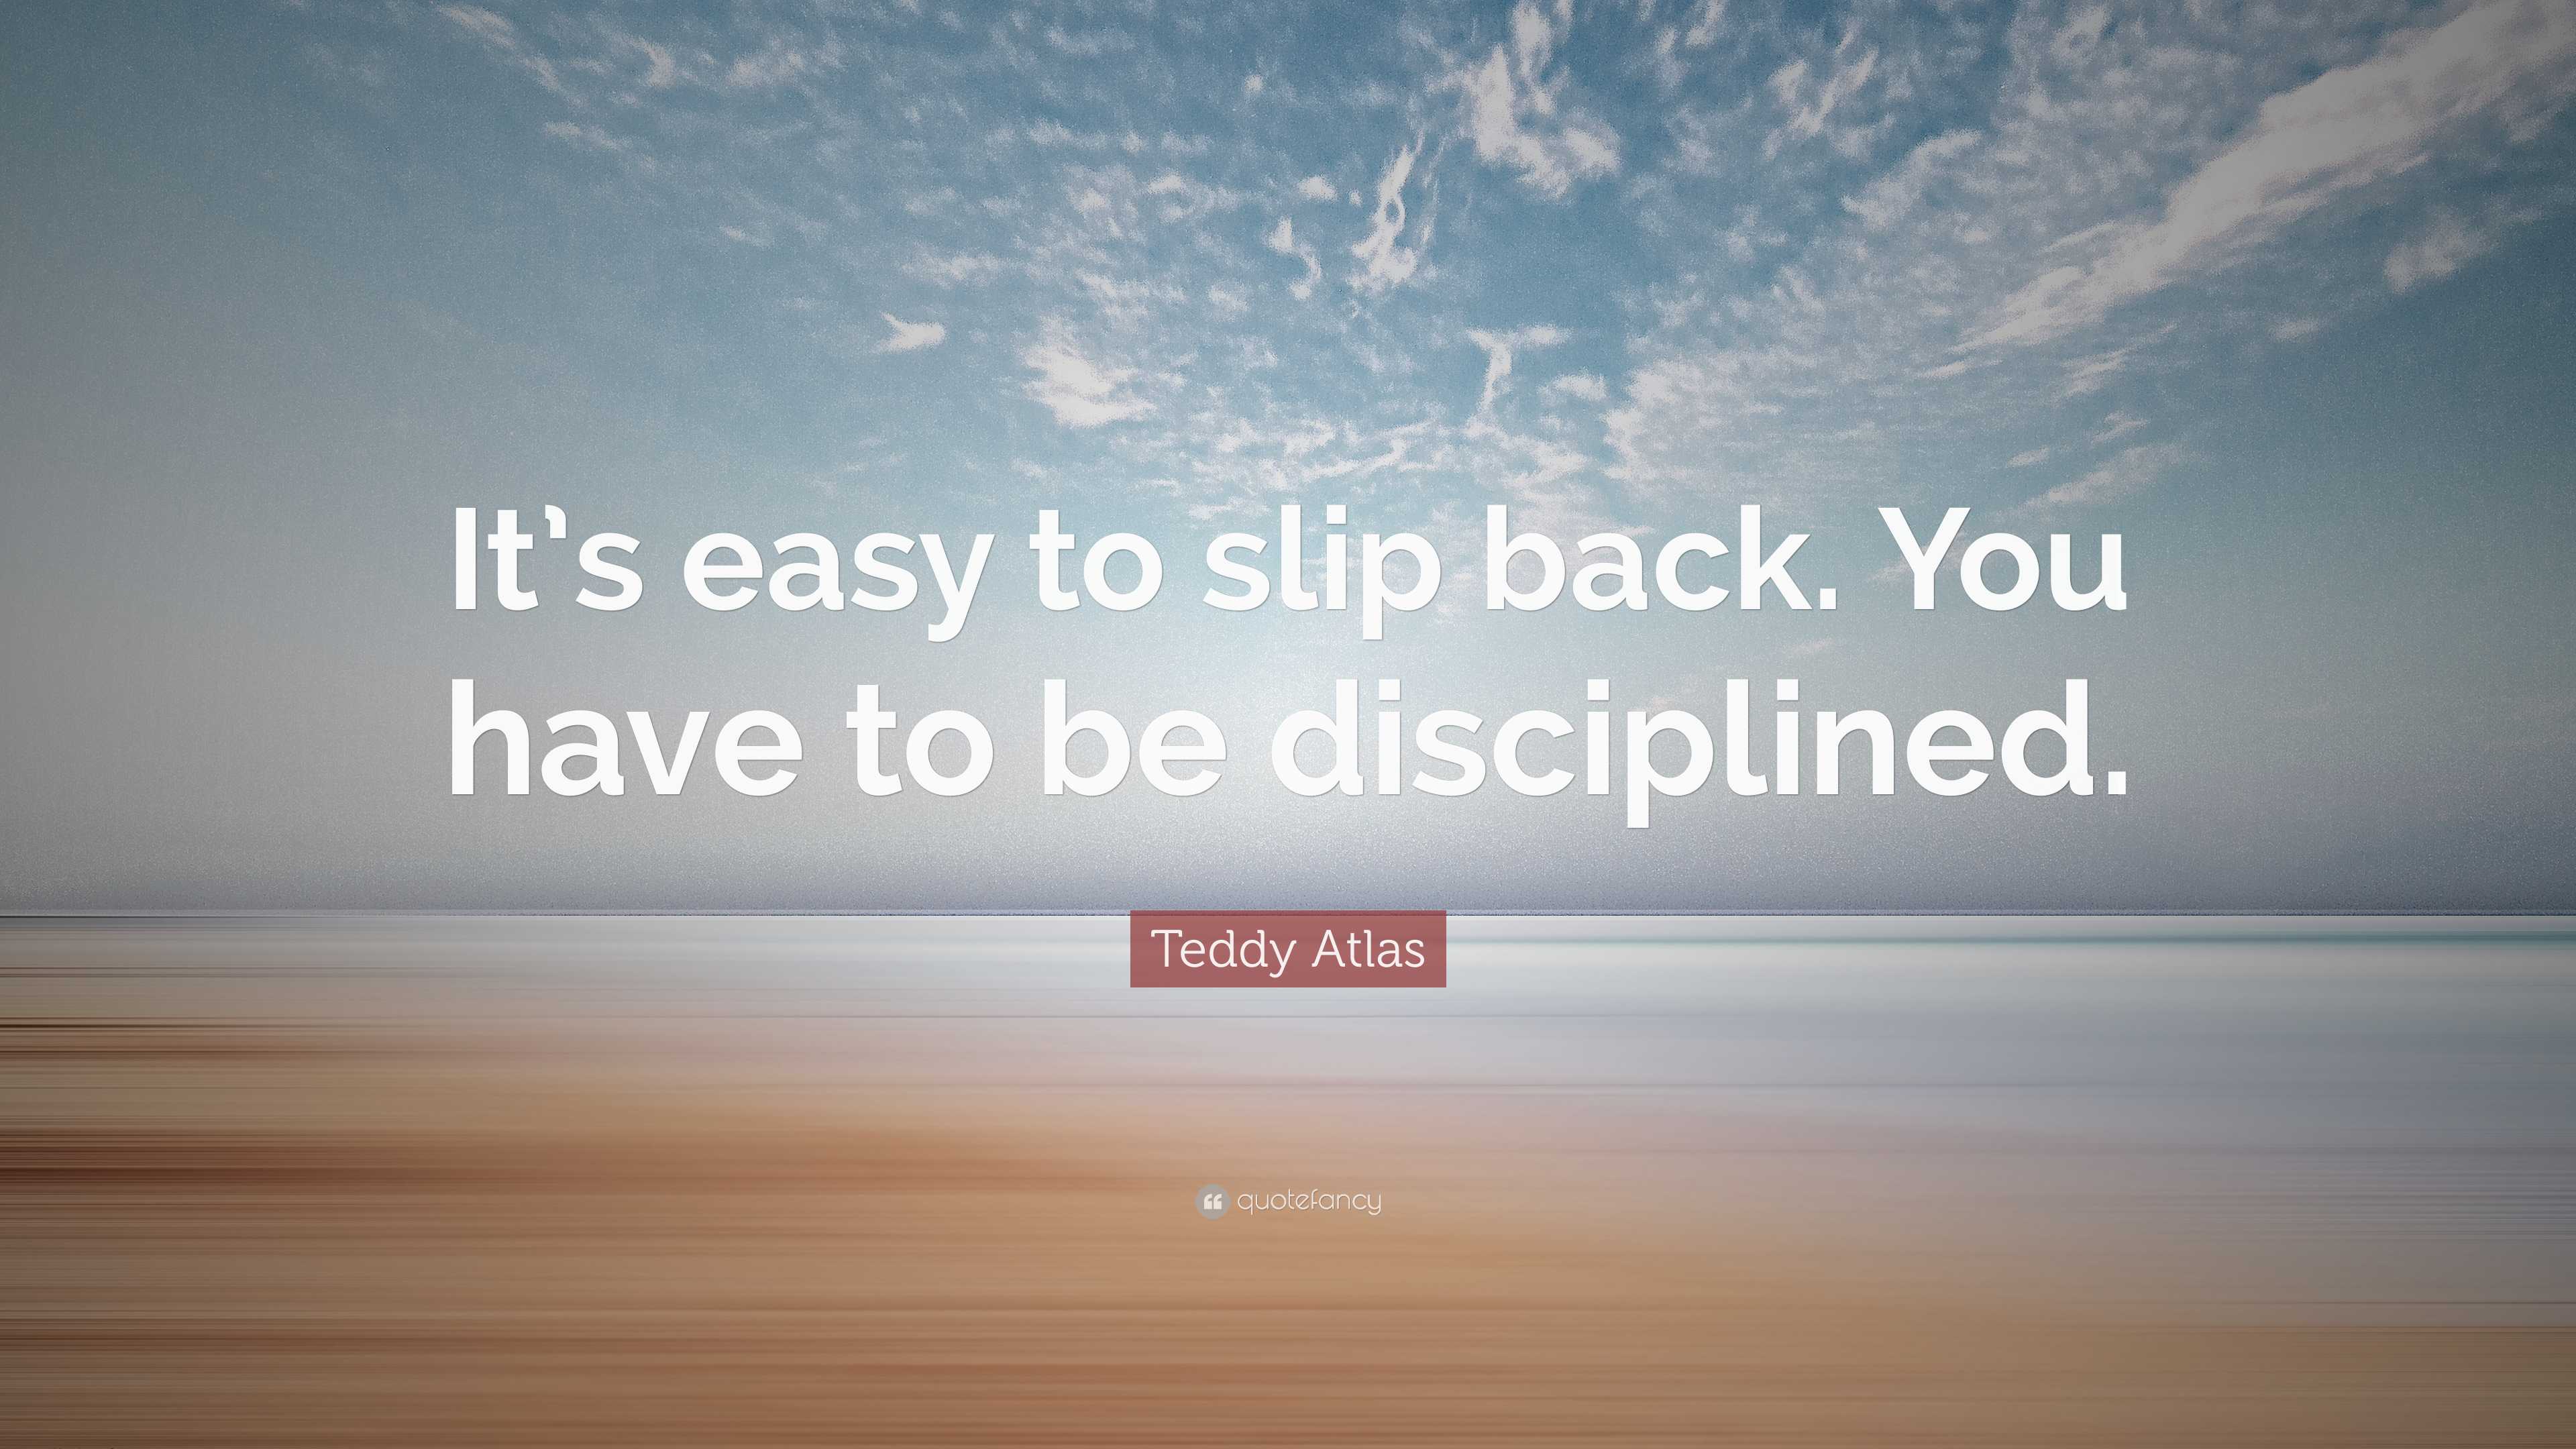 https://quotefancy.com/media/wallpaper/3840x2160/7801676-Teddy-Atlas-Quote-It-s-easy-to-slip-back-You-have-to-be.jpg